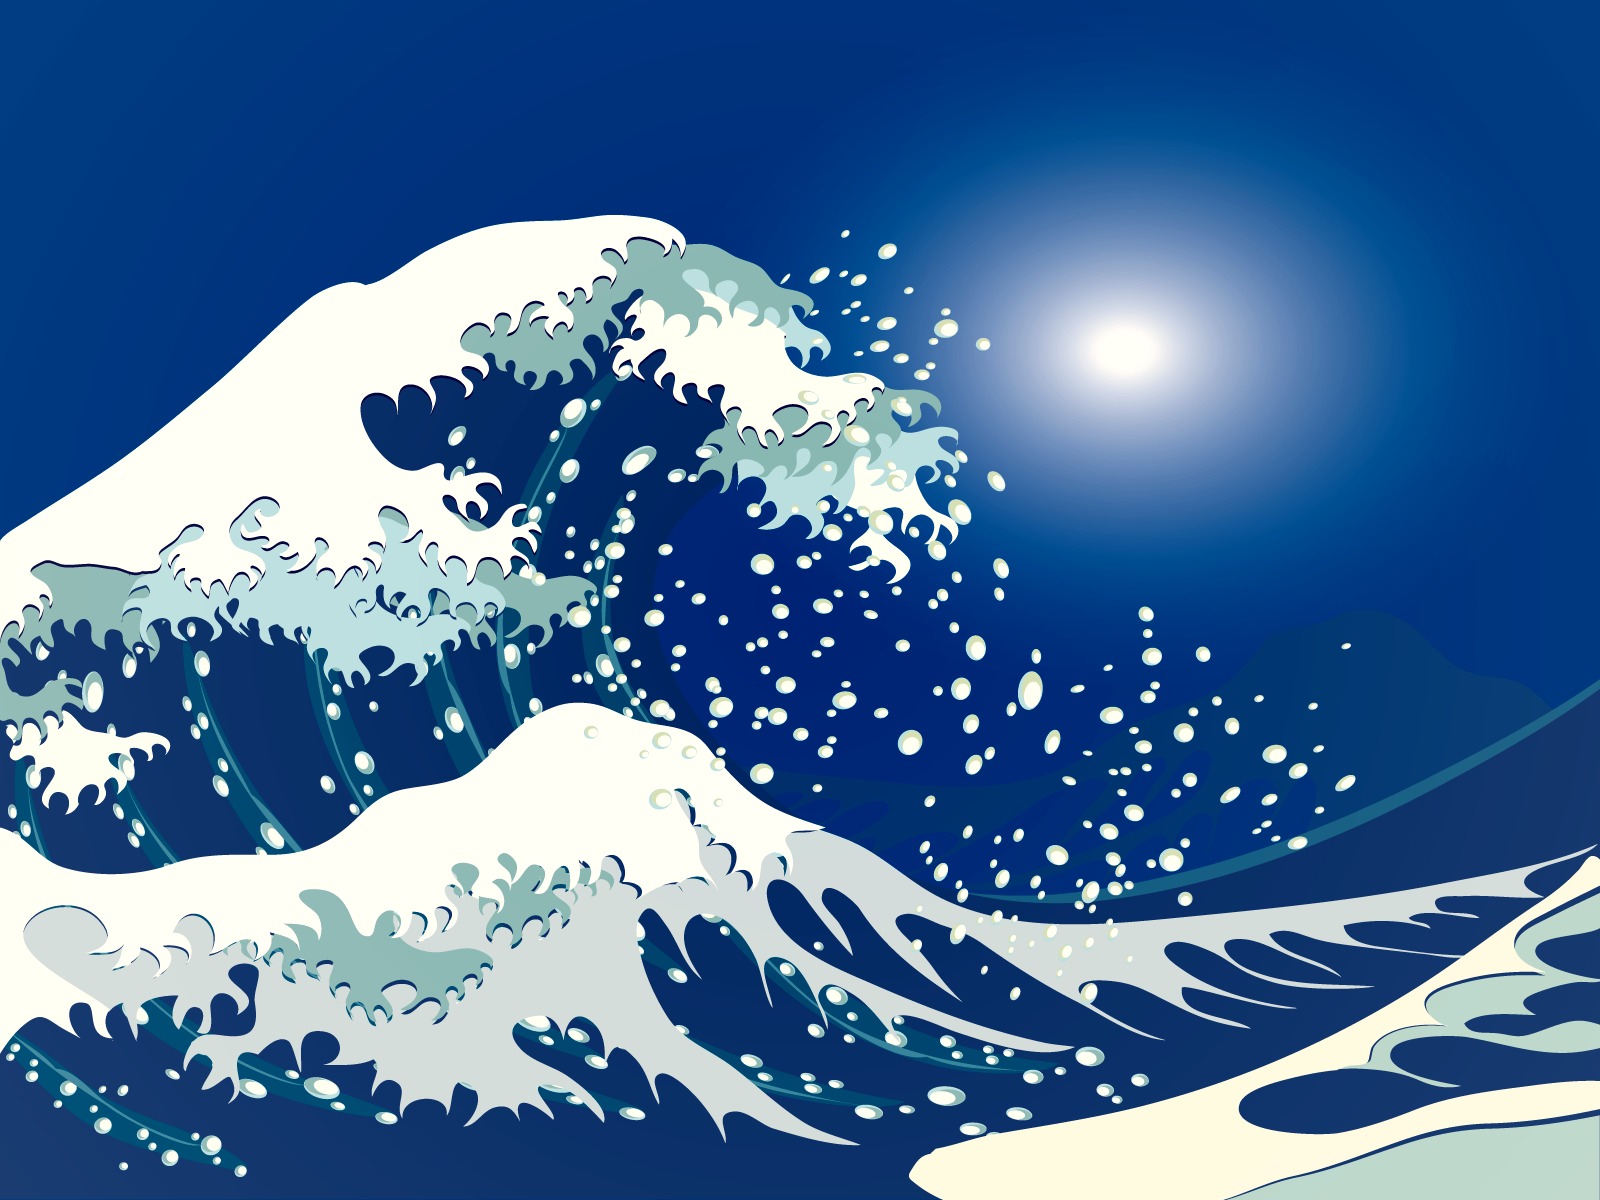 Pacific Waves: A stunning Artistic desktop wallpaper featuring a majestic wave inspired by The Great Wave off Kanagawa.